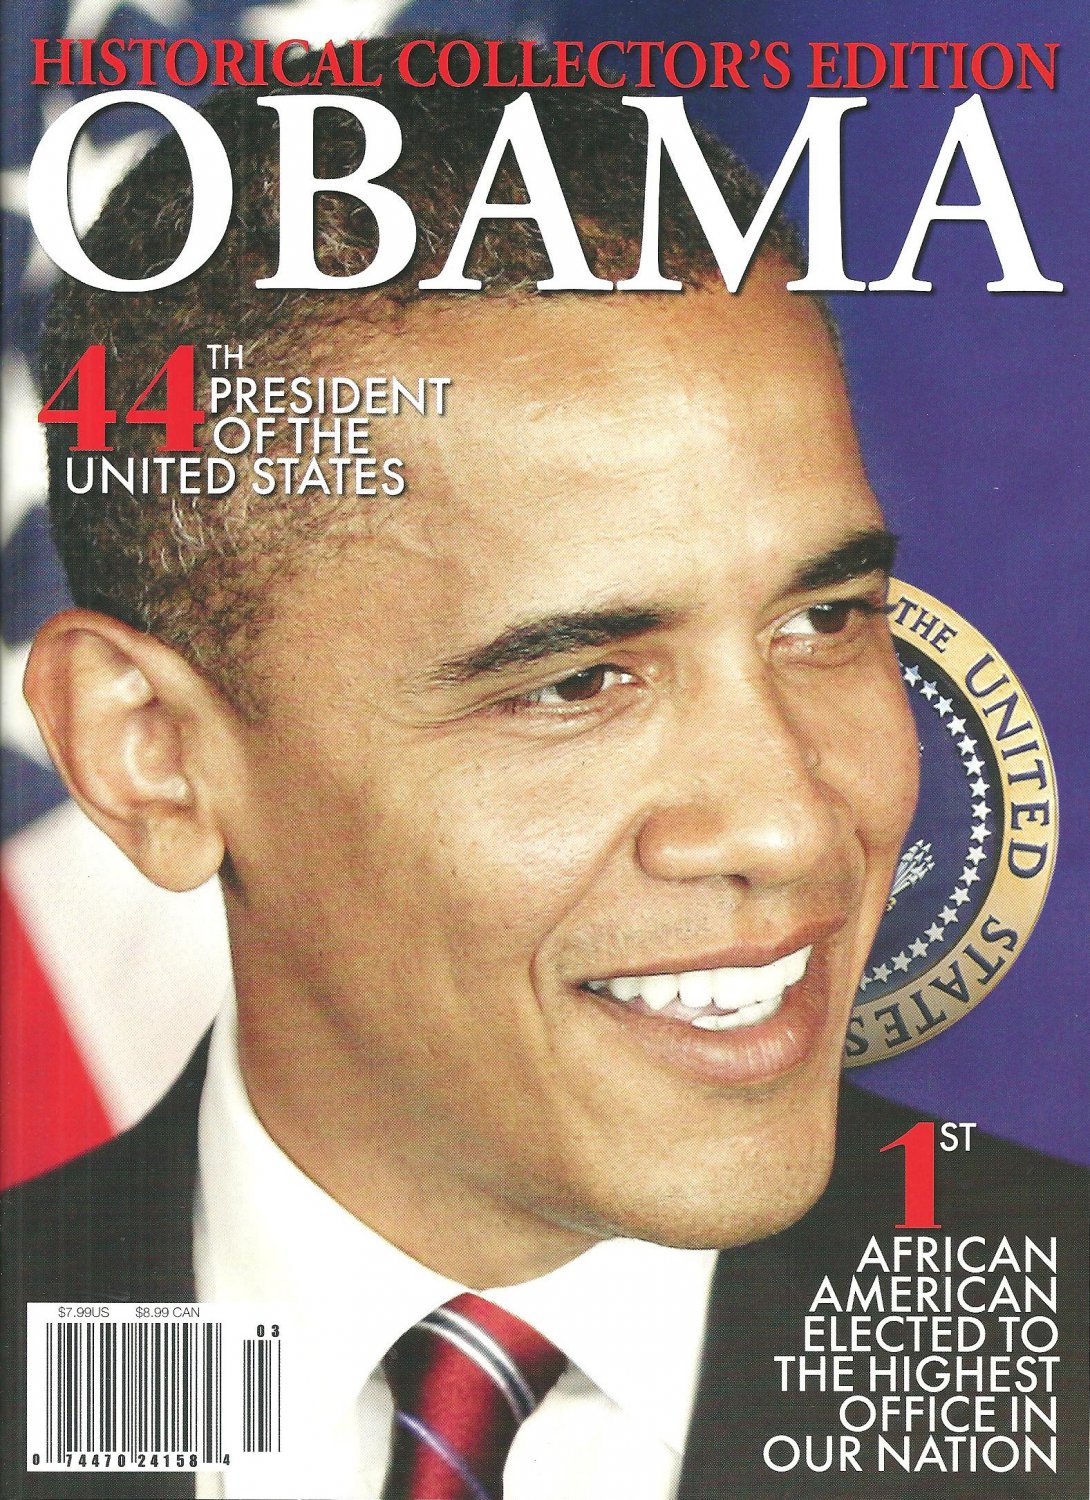 Historical Collector's Edition BARACK OBAMA 2008 Beautiful Full-Color Magazine